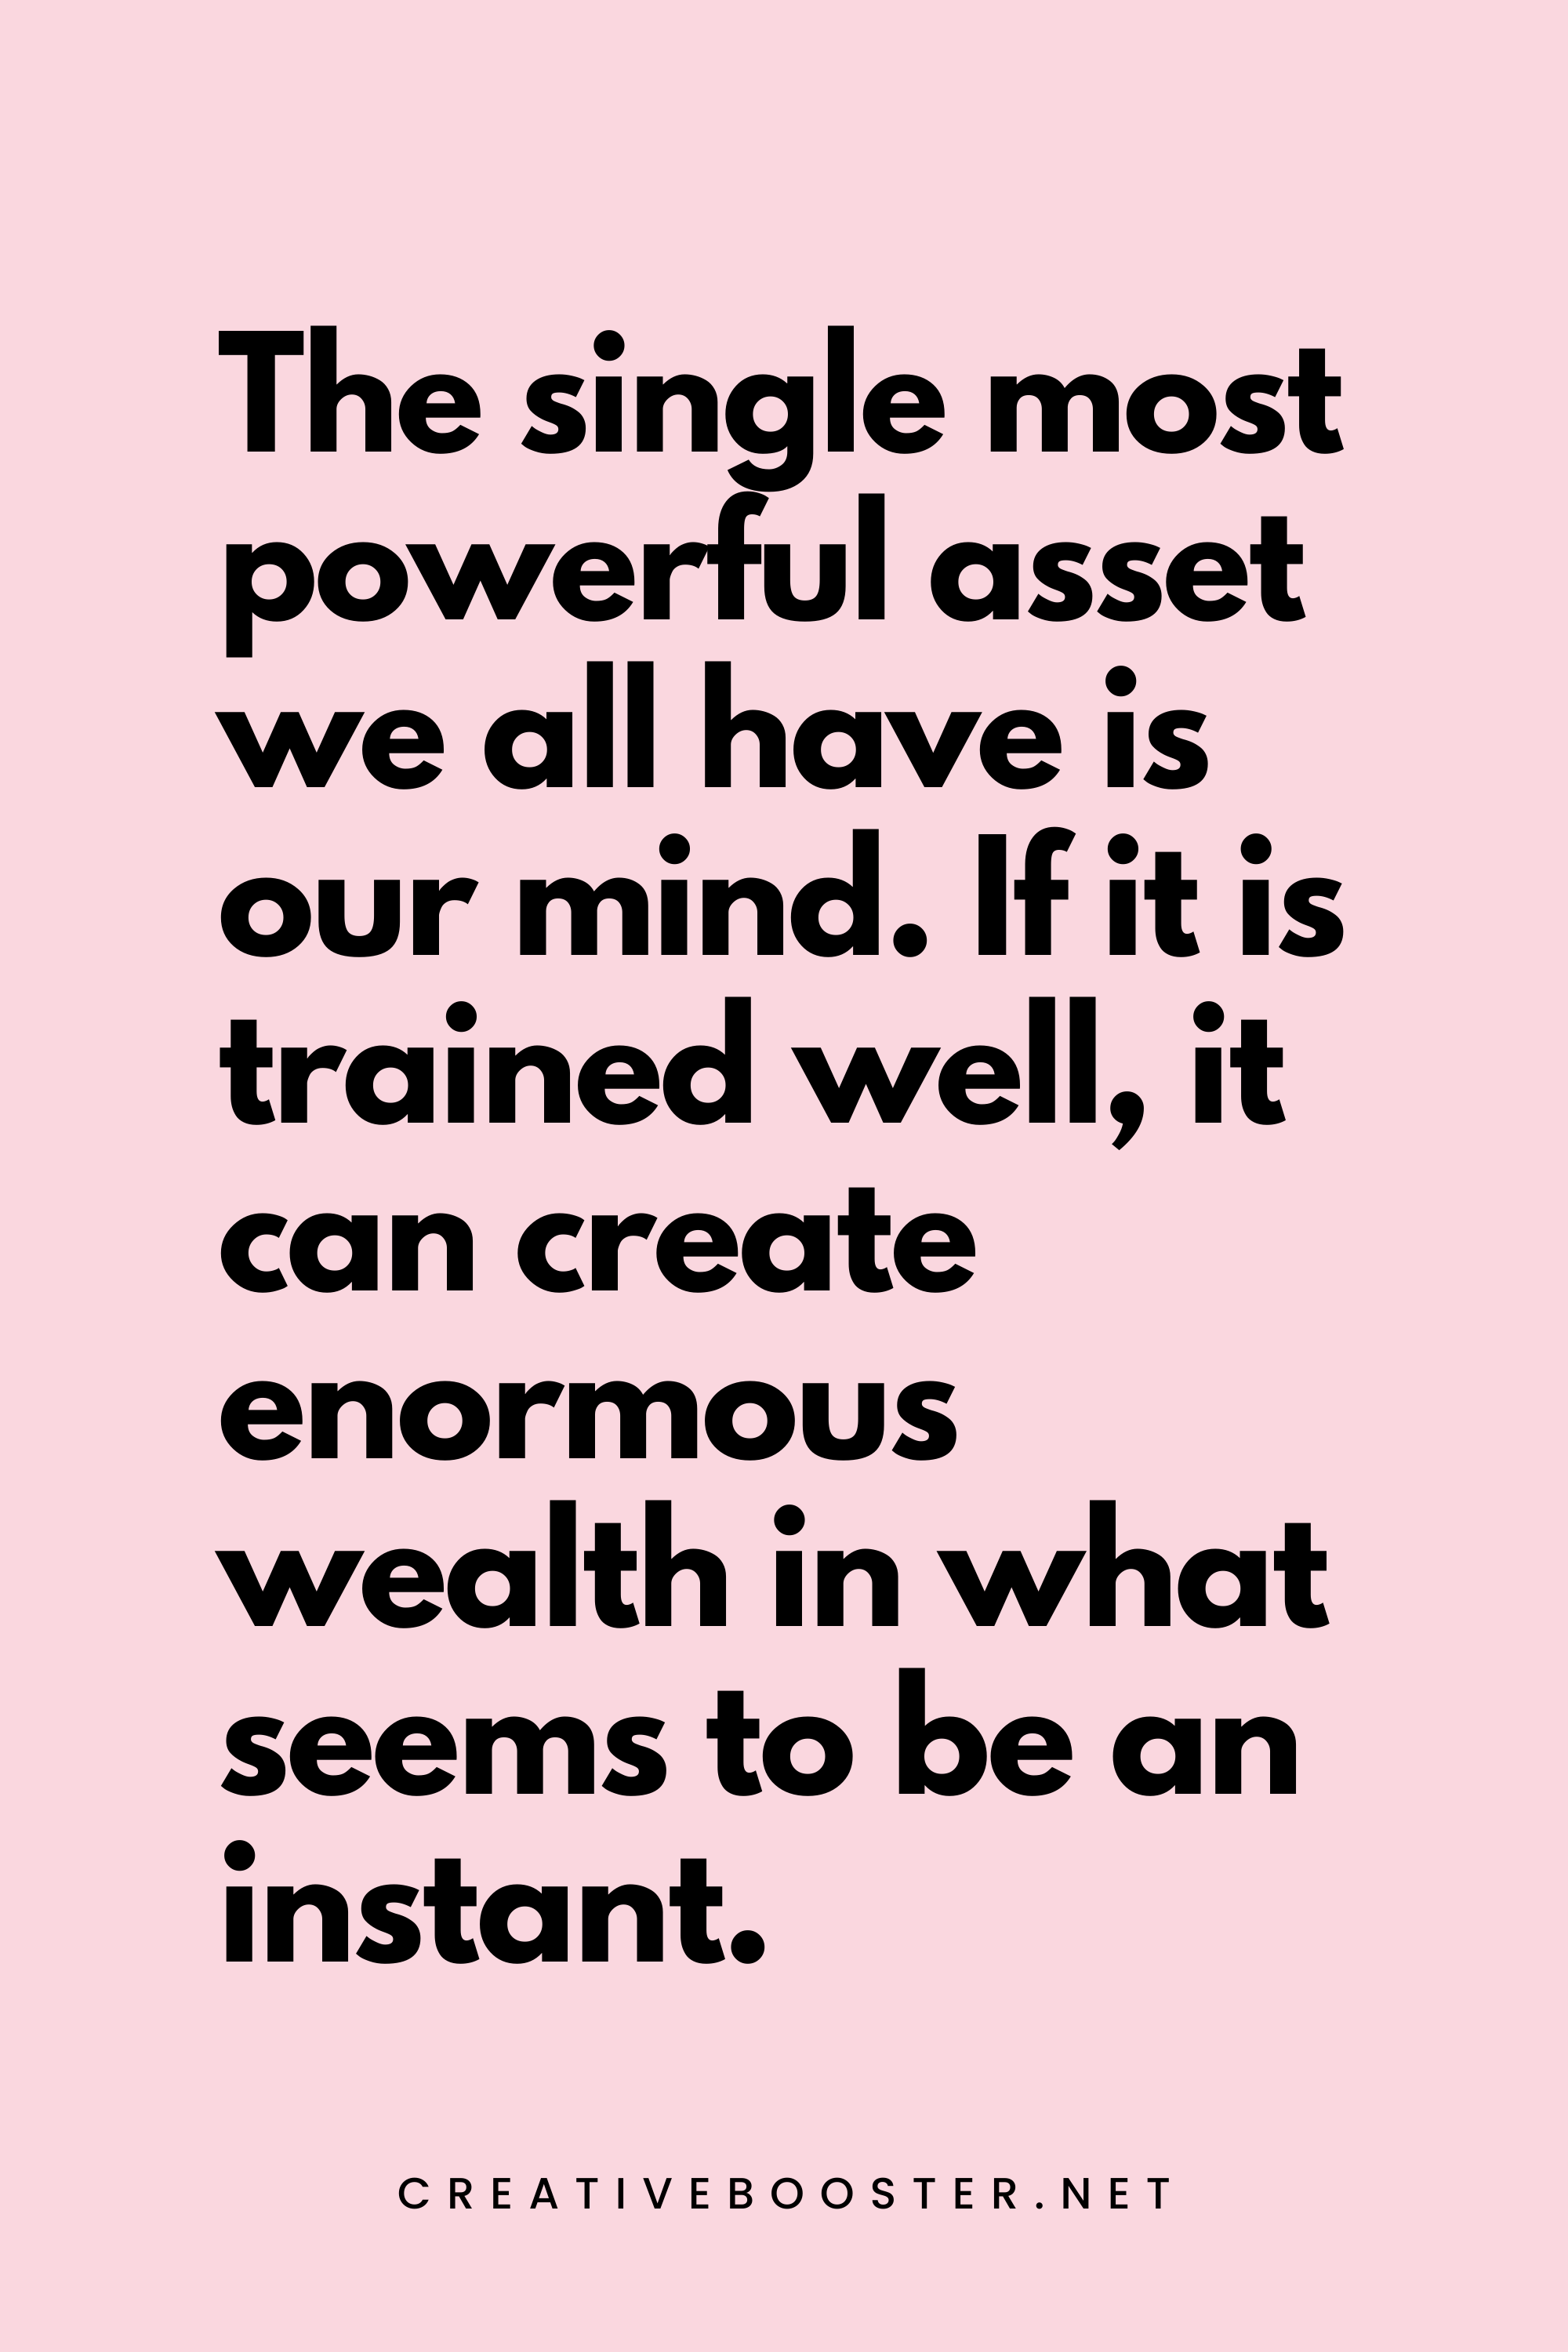 70. The single most powerful asset we all have is our mind. If it is trained well, it can create enormous wealth in what seems to be an instant. - Robert Kiyosaki - 7. Financial Freedom Quotes by Robert Kiyosaki